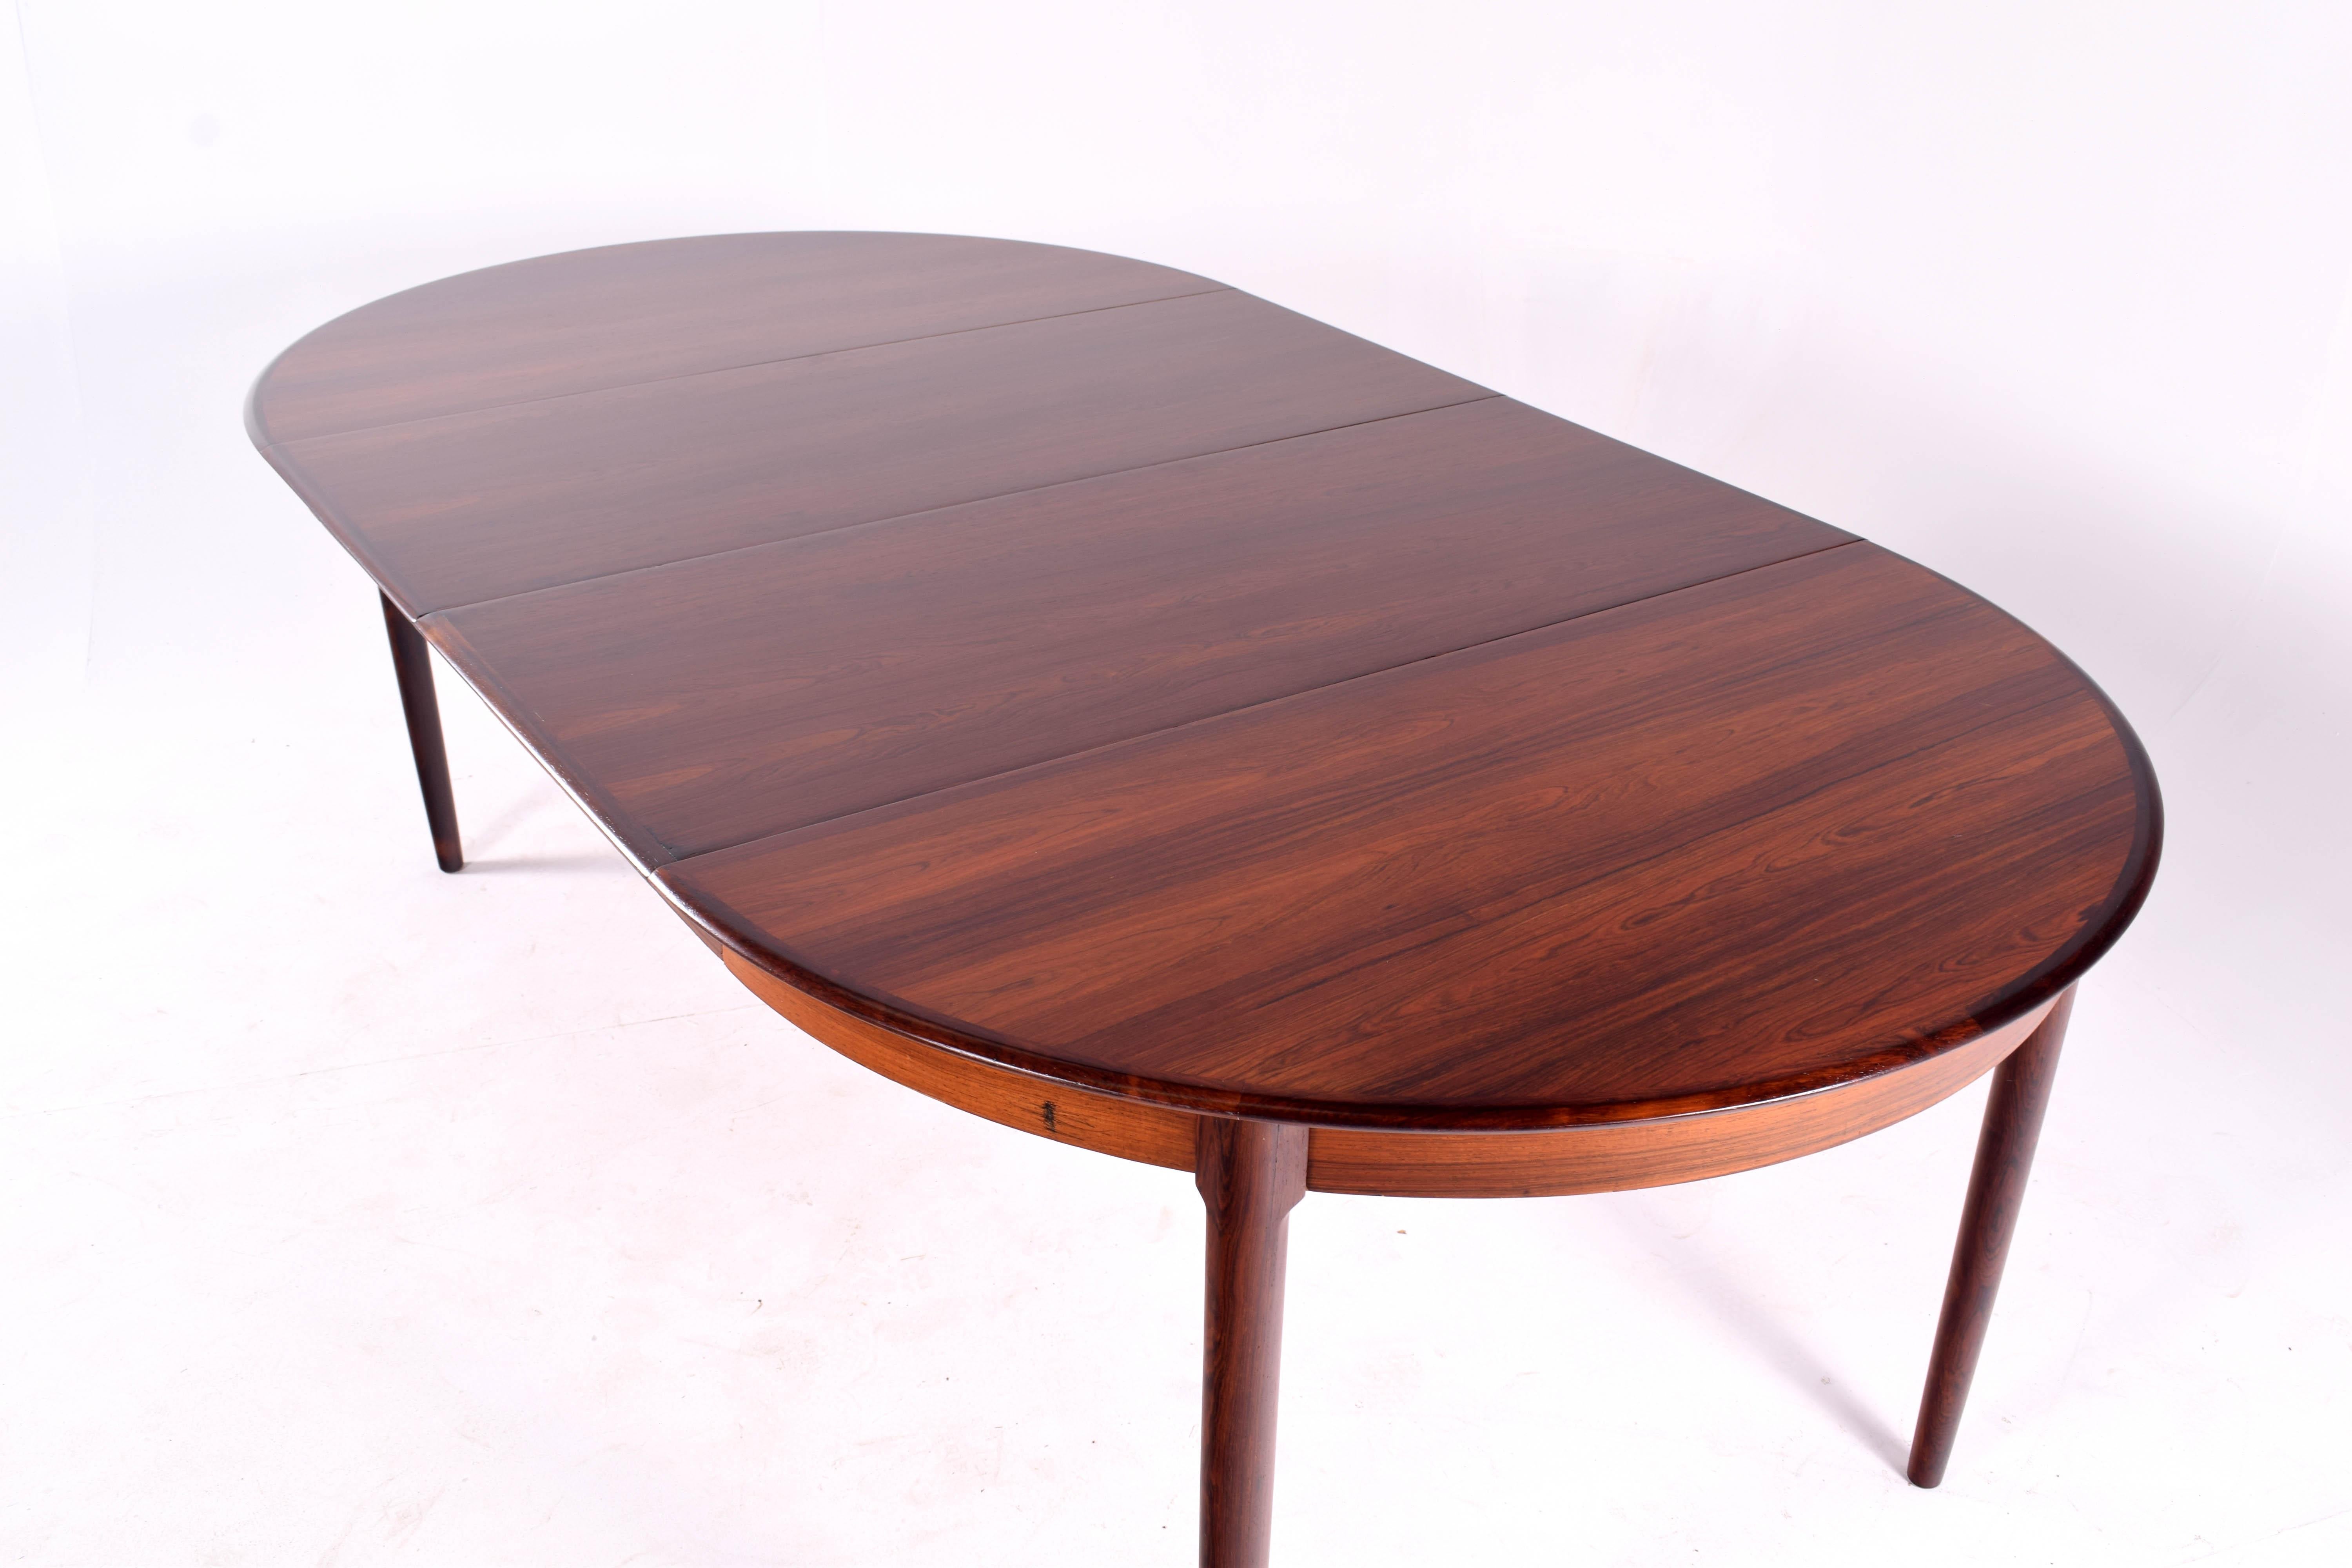 Mid-20th Century Midcentury Rosewood Dining Table Model 15 by Niels Moller for J.L. Møller